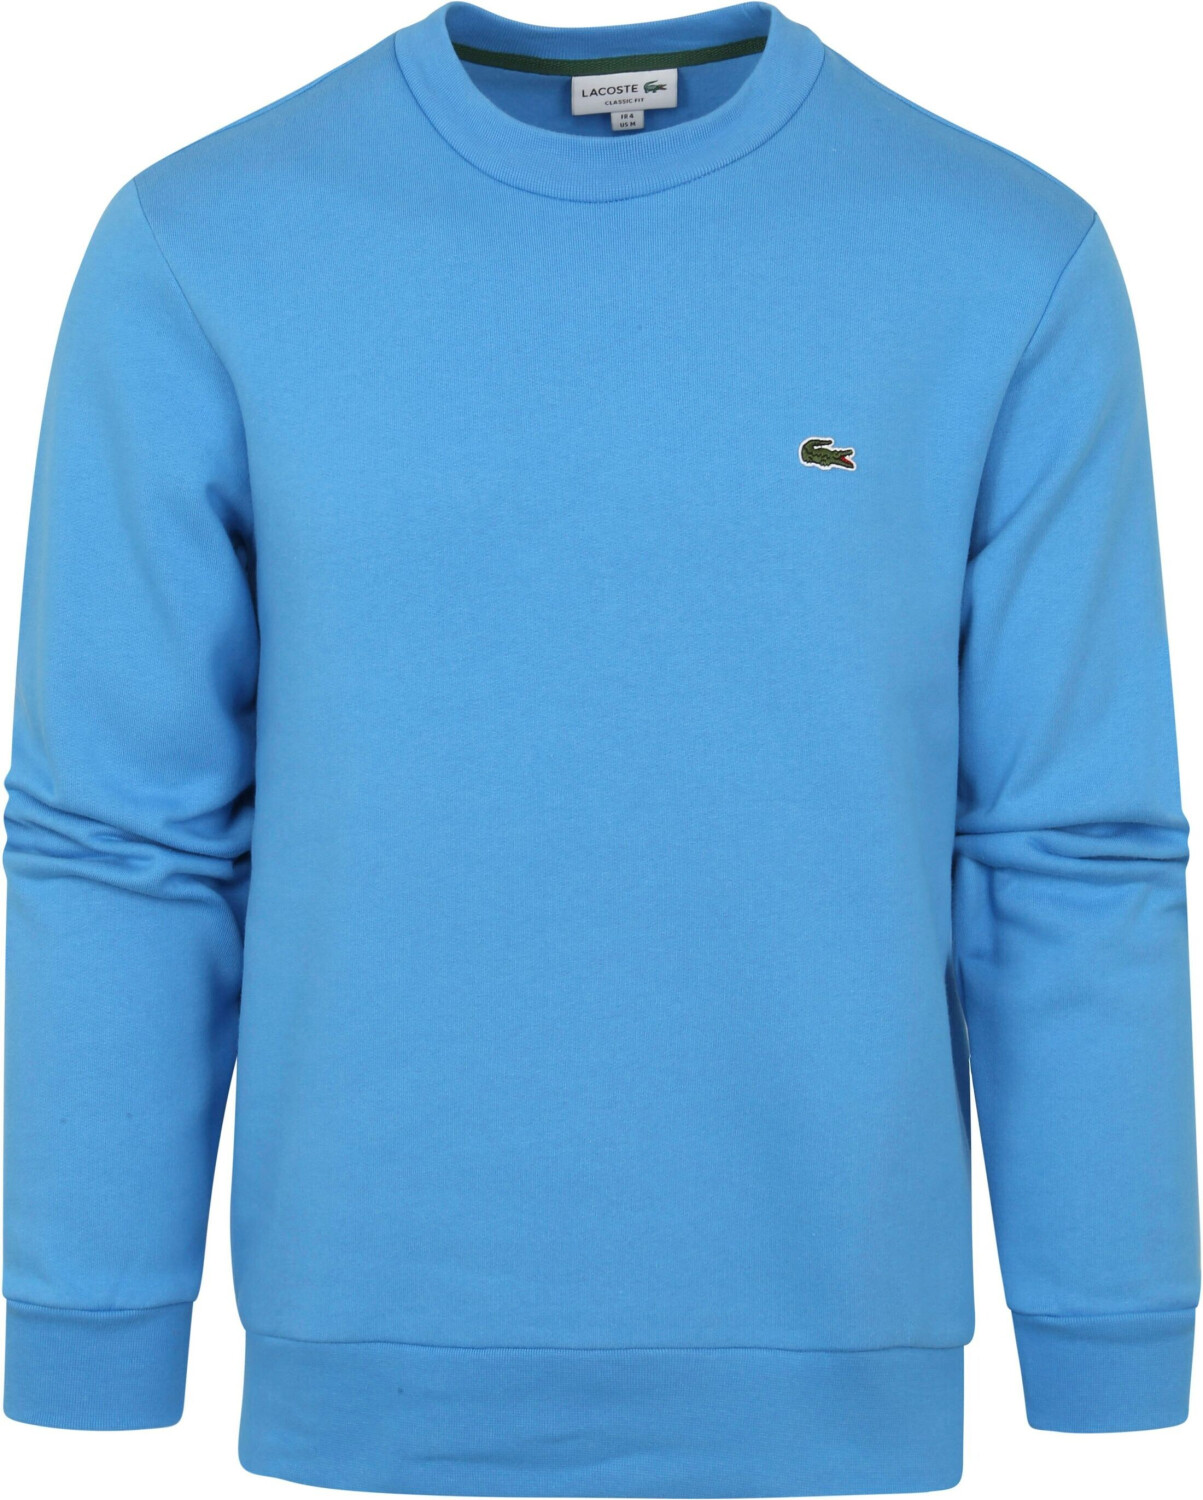 Buy Lacoste Sweatshirts (SH9608) argentine blue from £68.00 (Today) – Best  Deals on